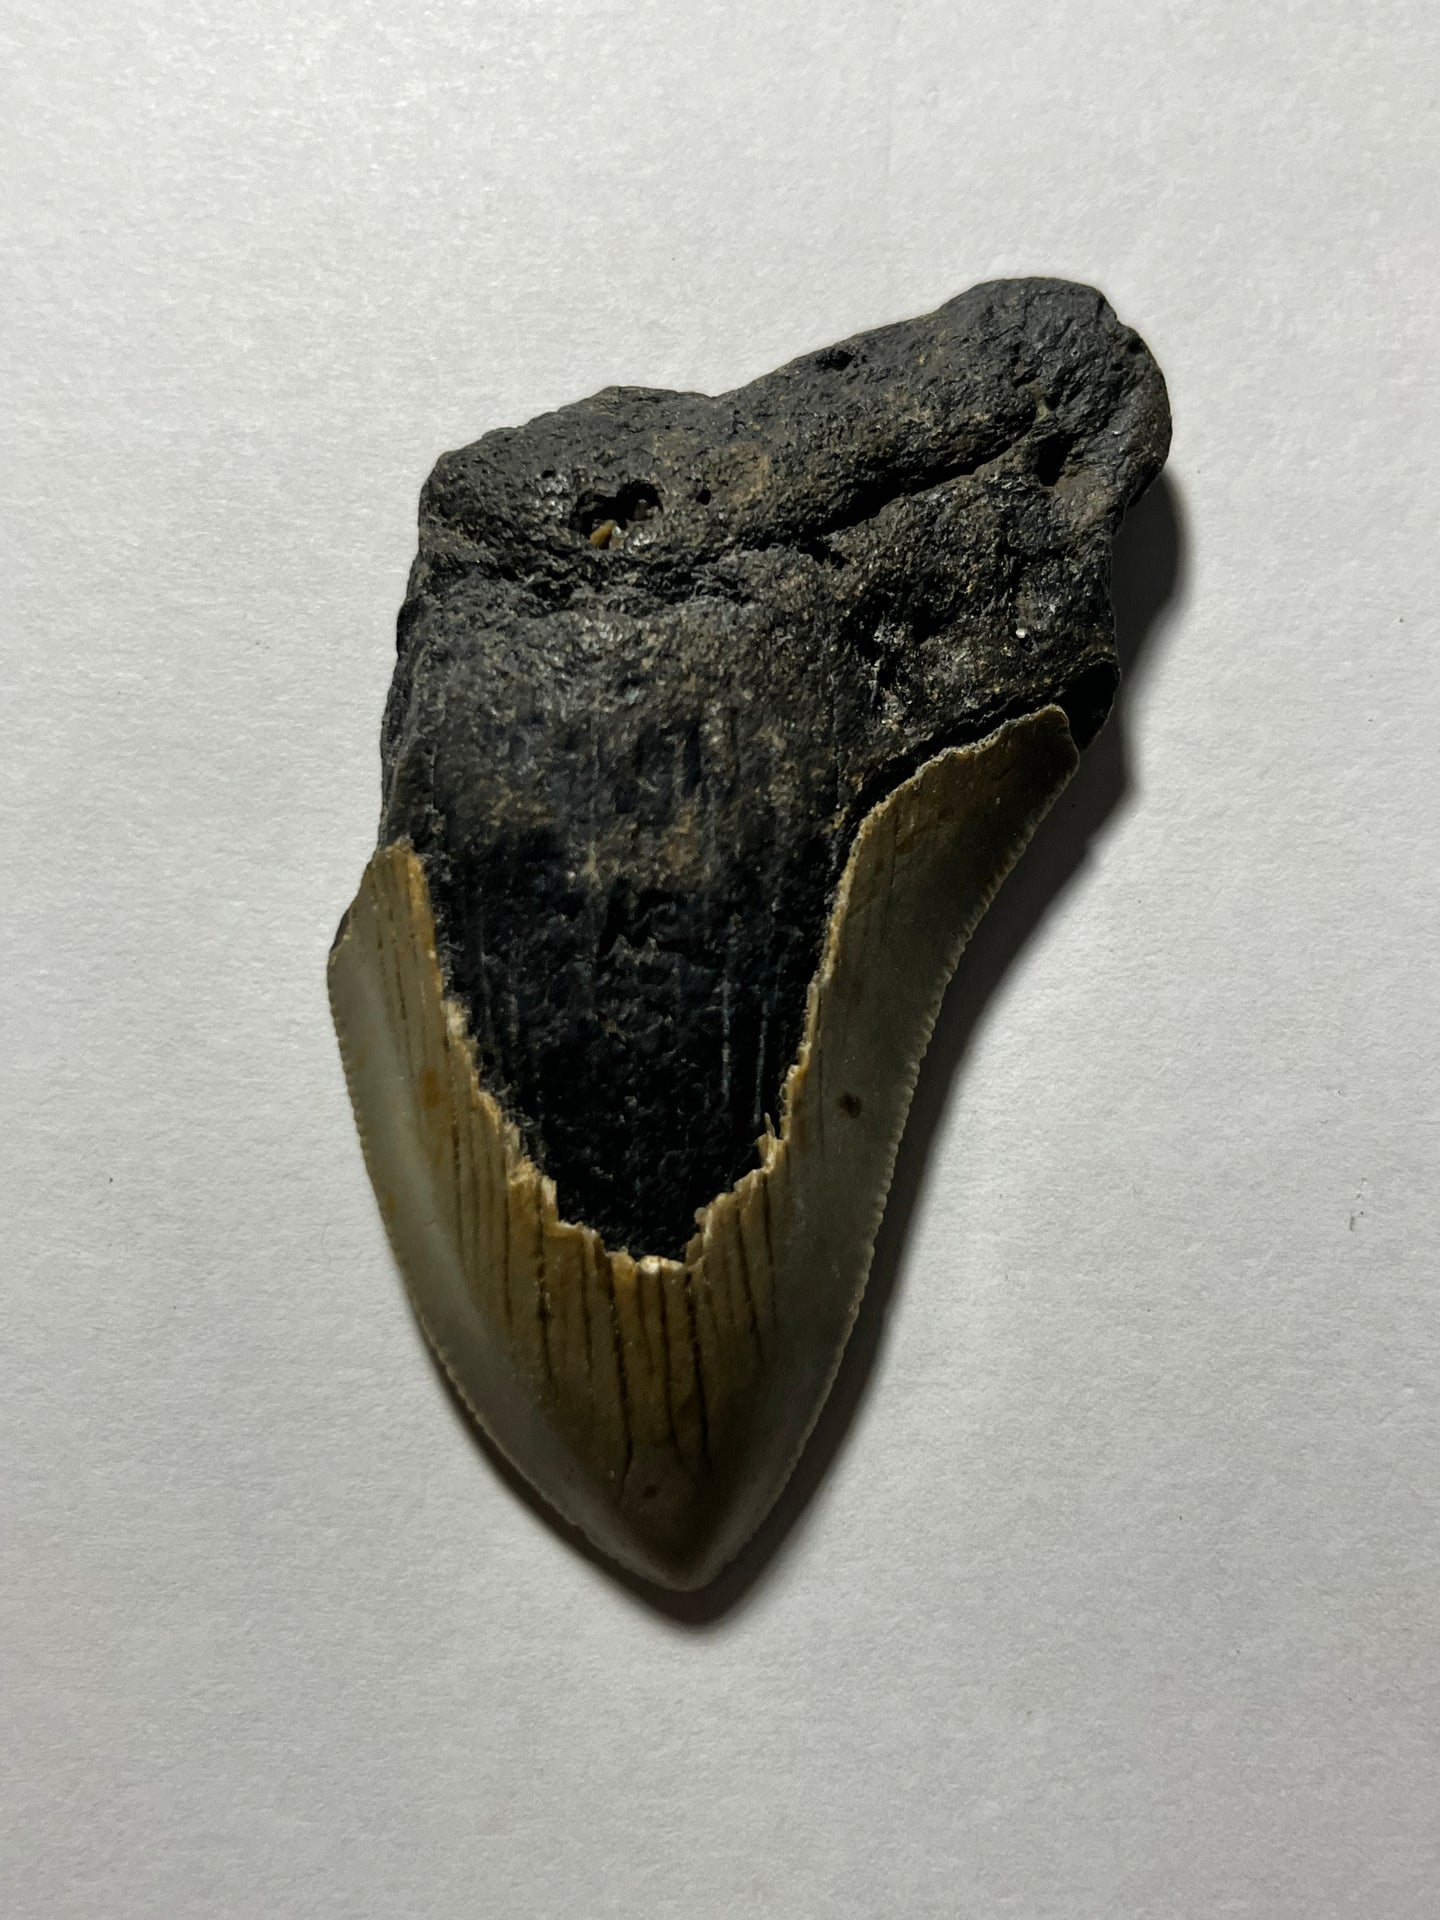 Approximately 3” Fossil Megalodon Tooth for Sale